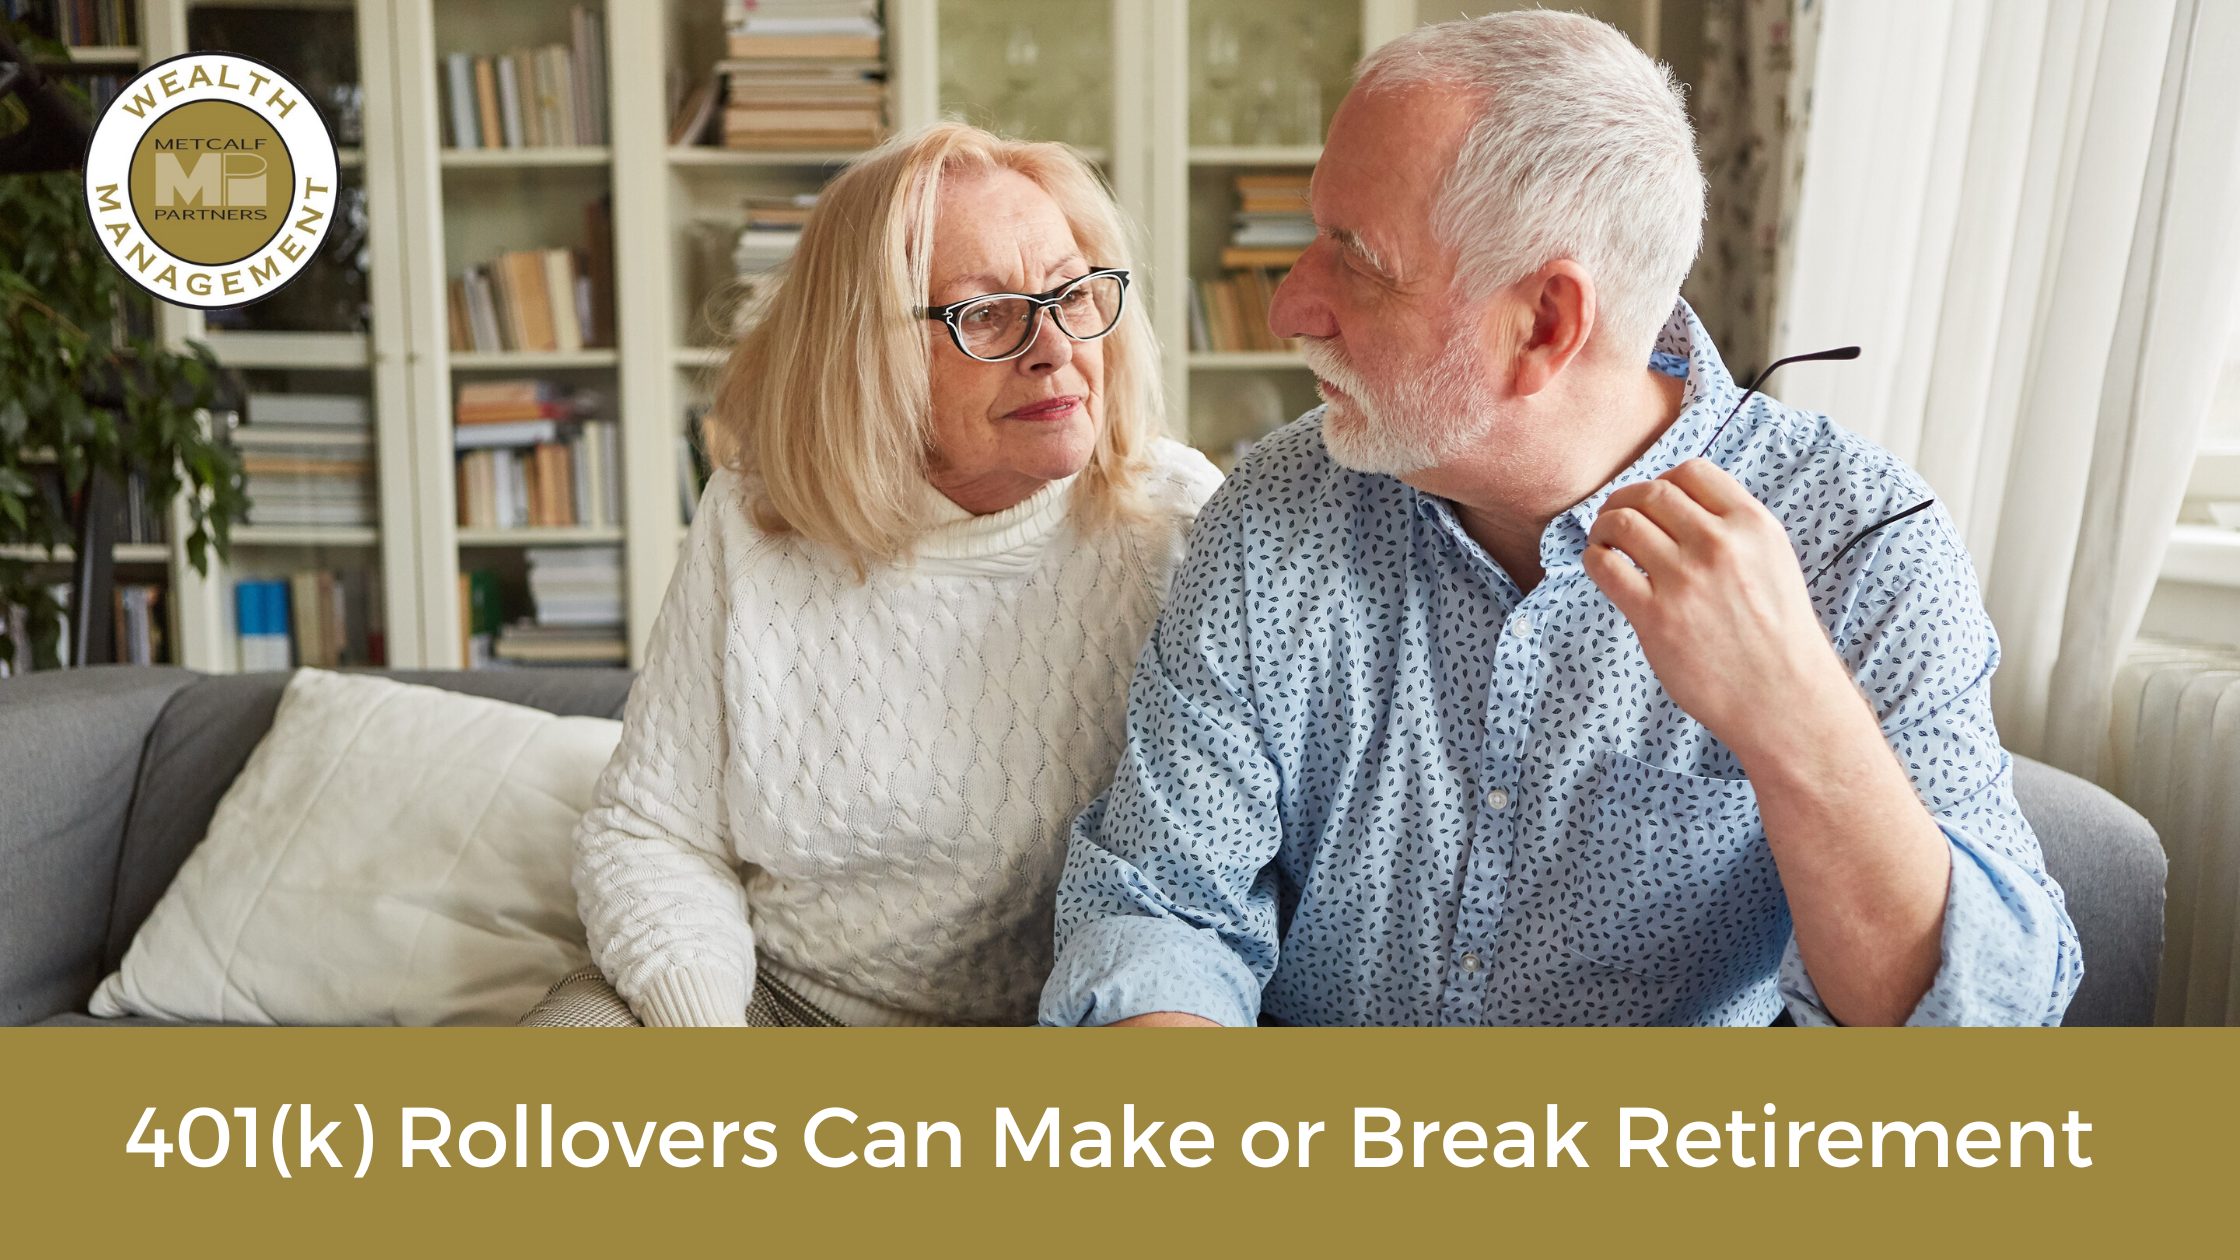 Featured image for “401(k) Rollovers Can Make or Break Retirement”